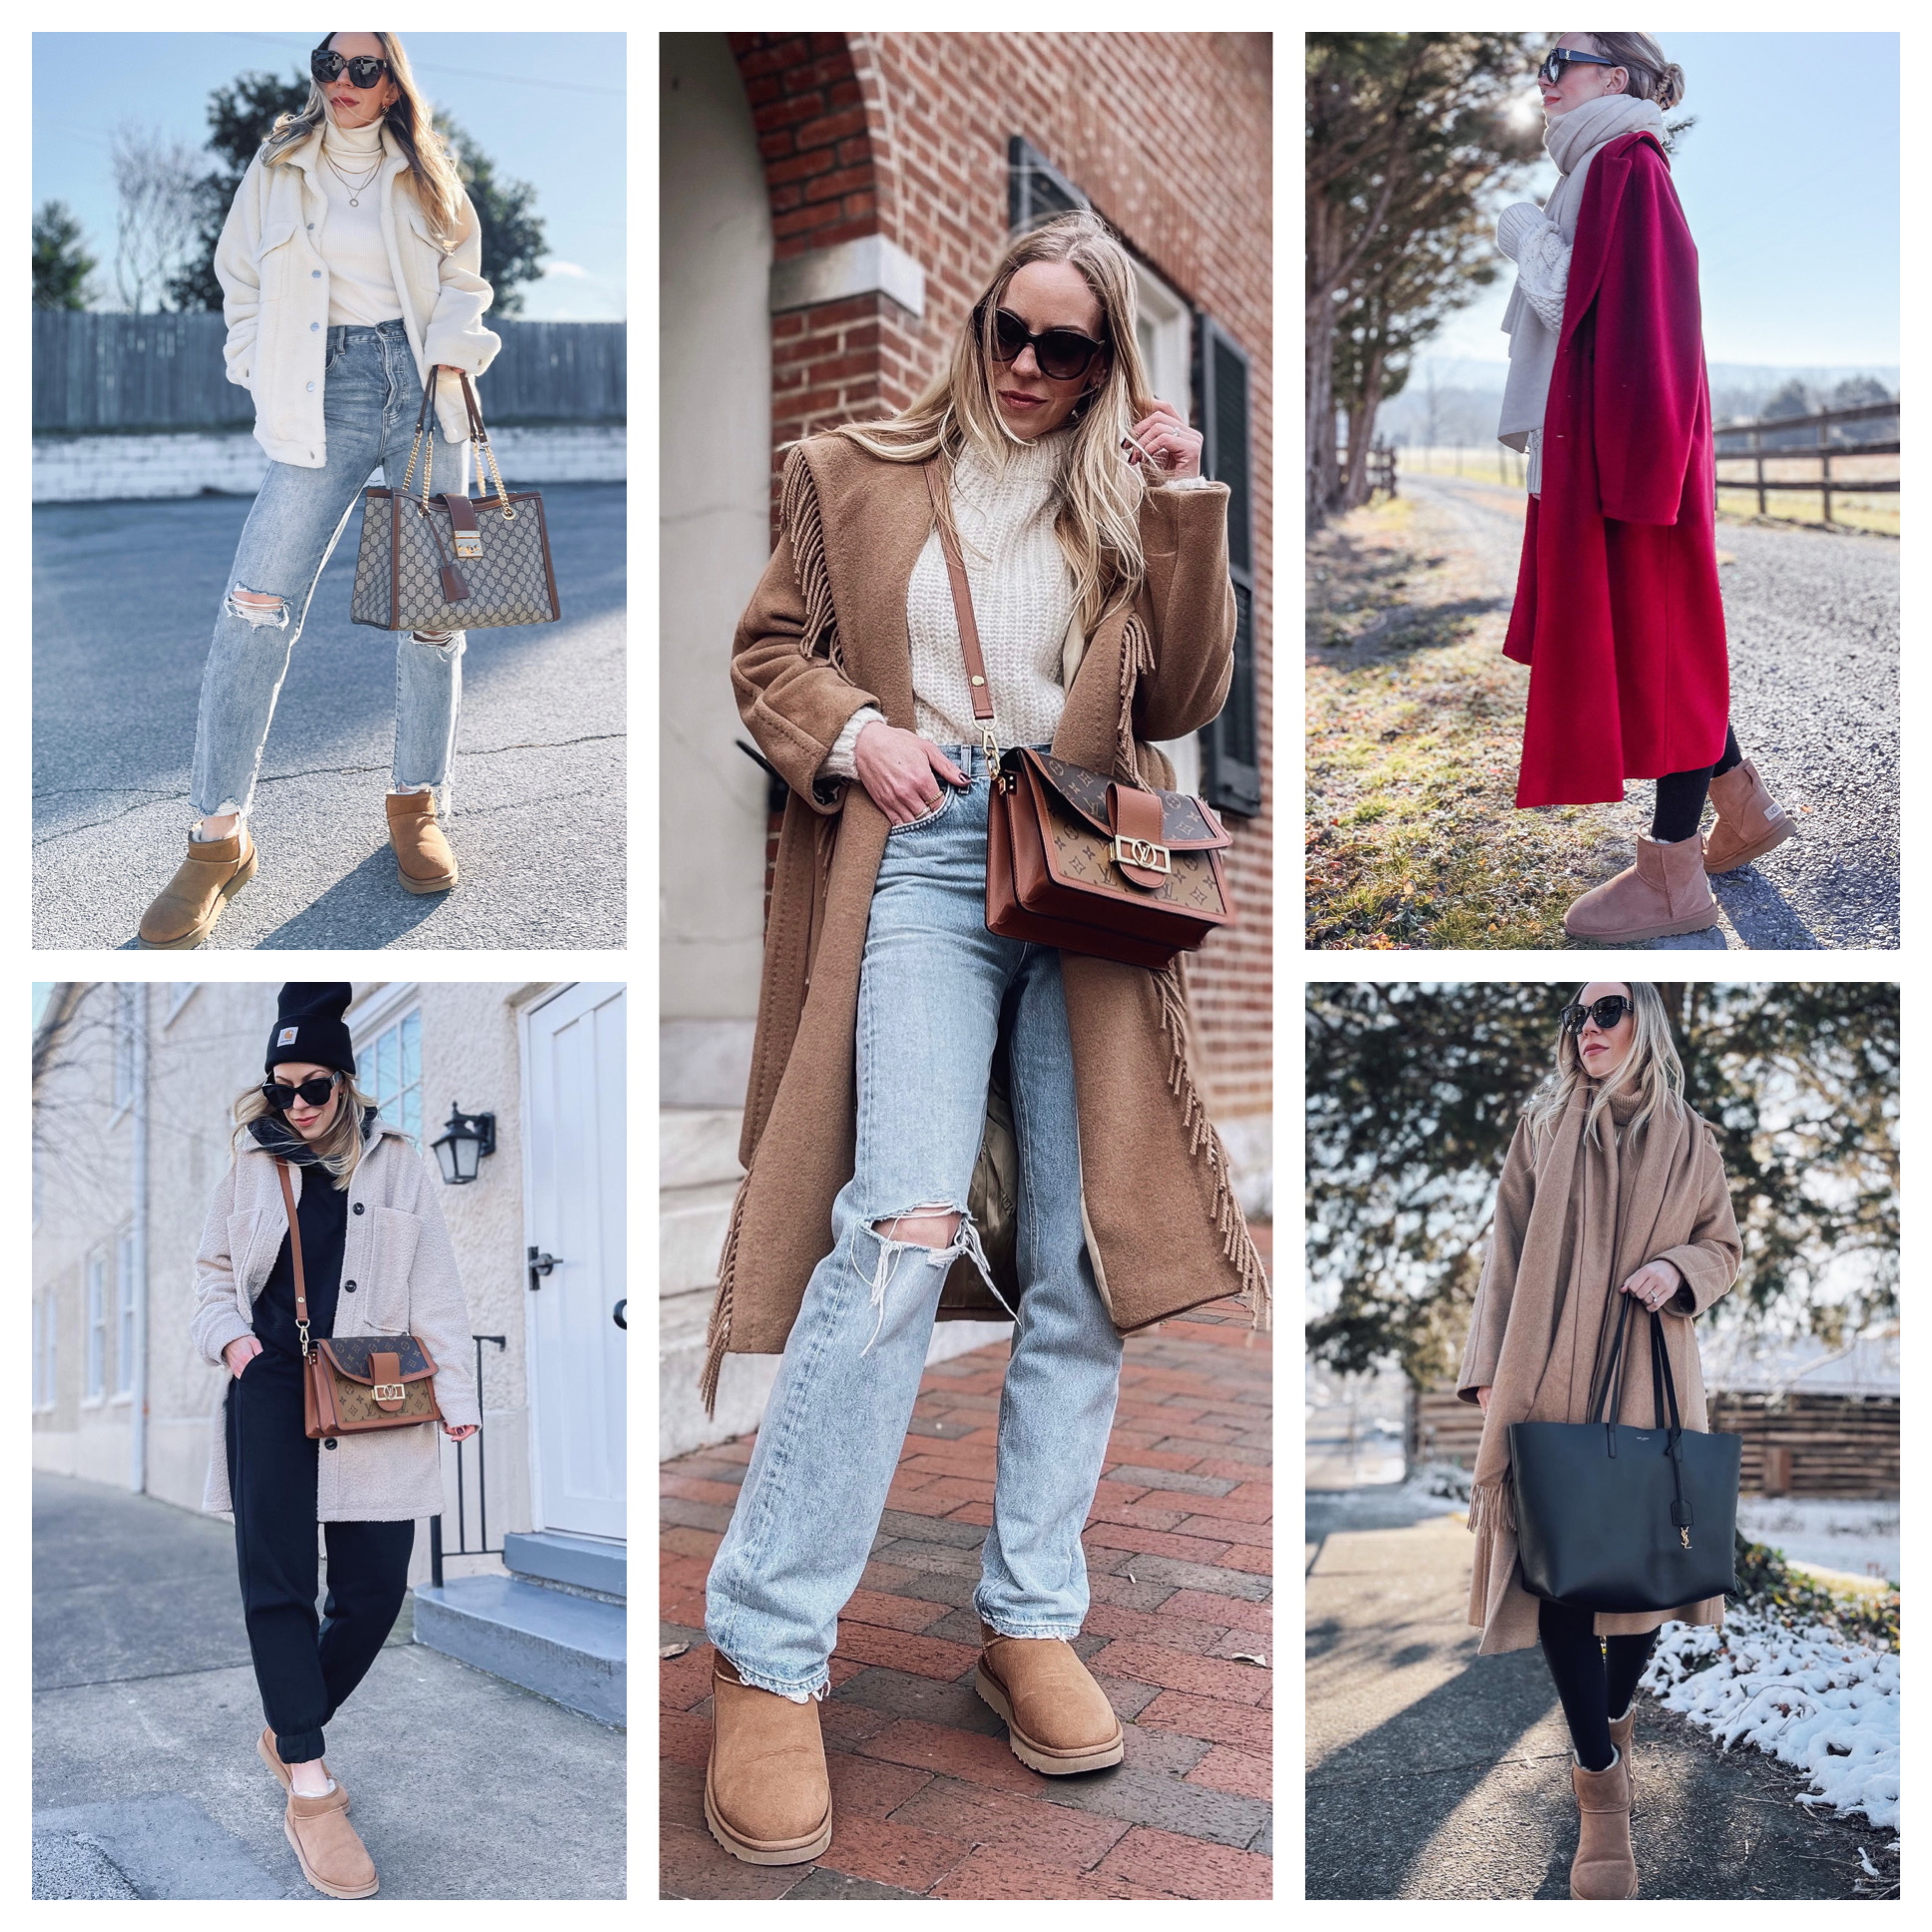 How to Style Ugg Boots: 11 Skirt and Dress Outfit Ideas